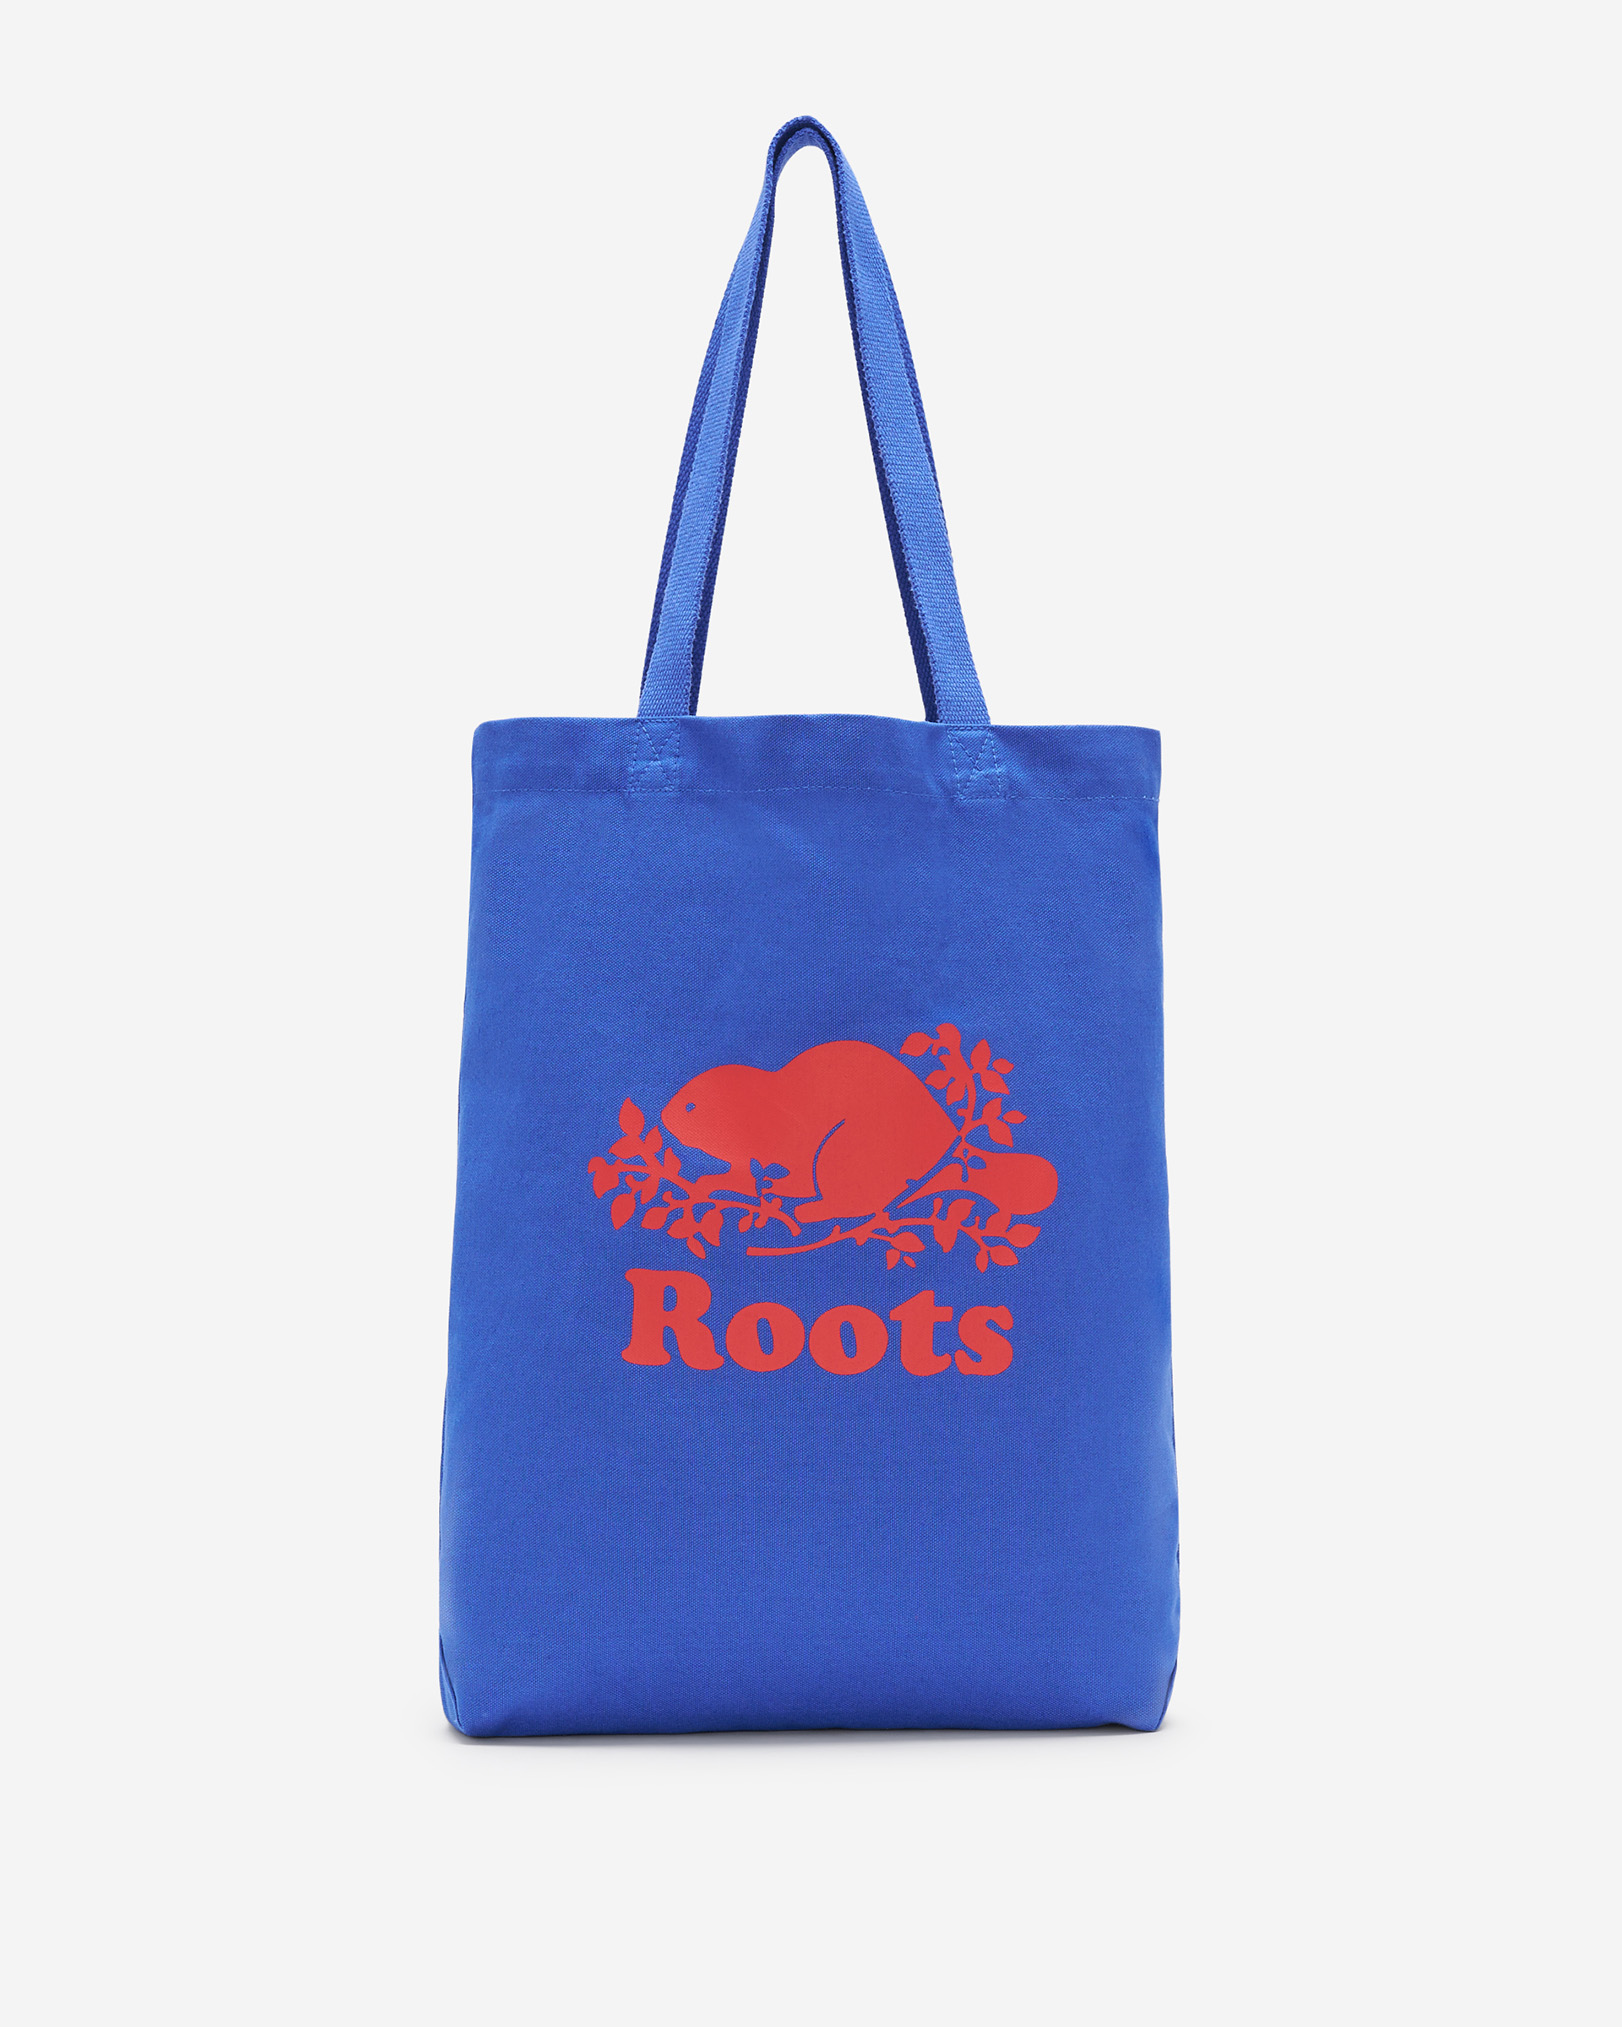 Roots Cooper Tote in Dazzling Blue